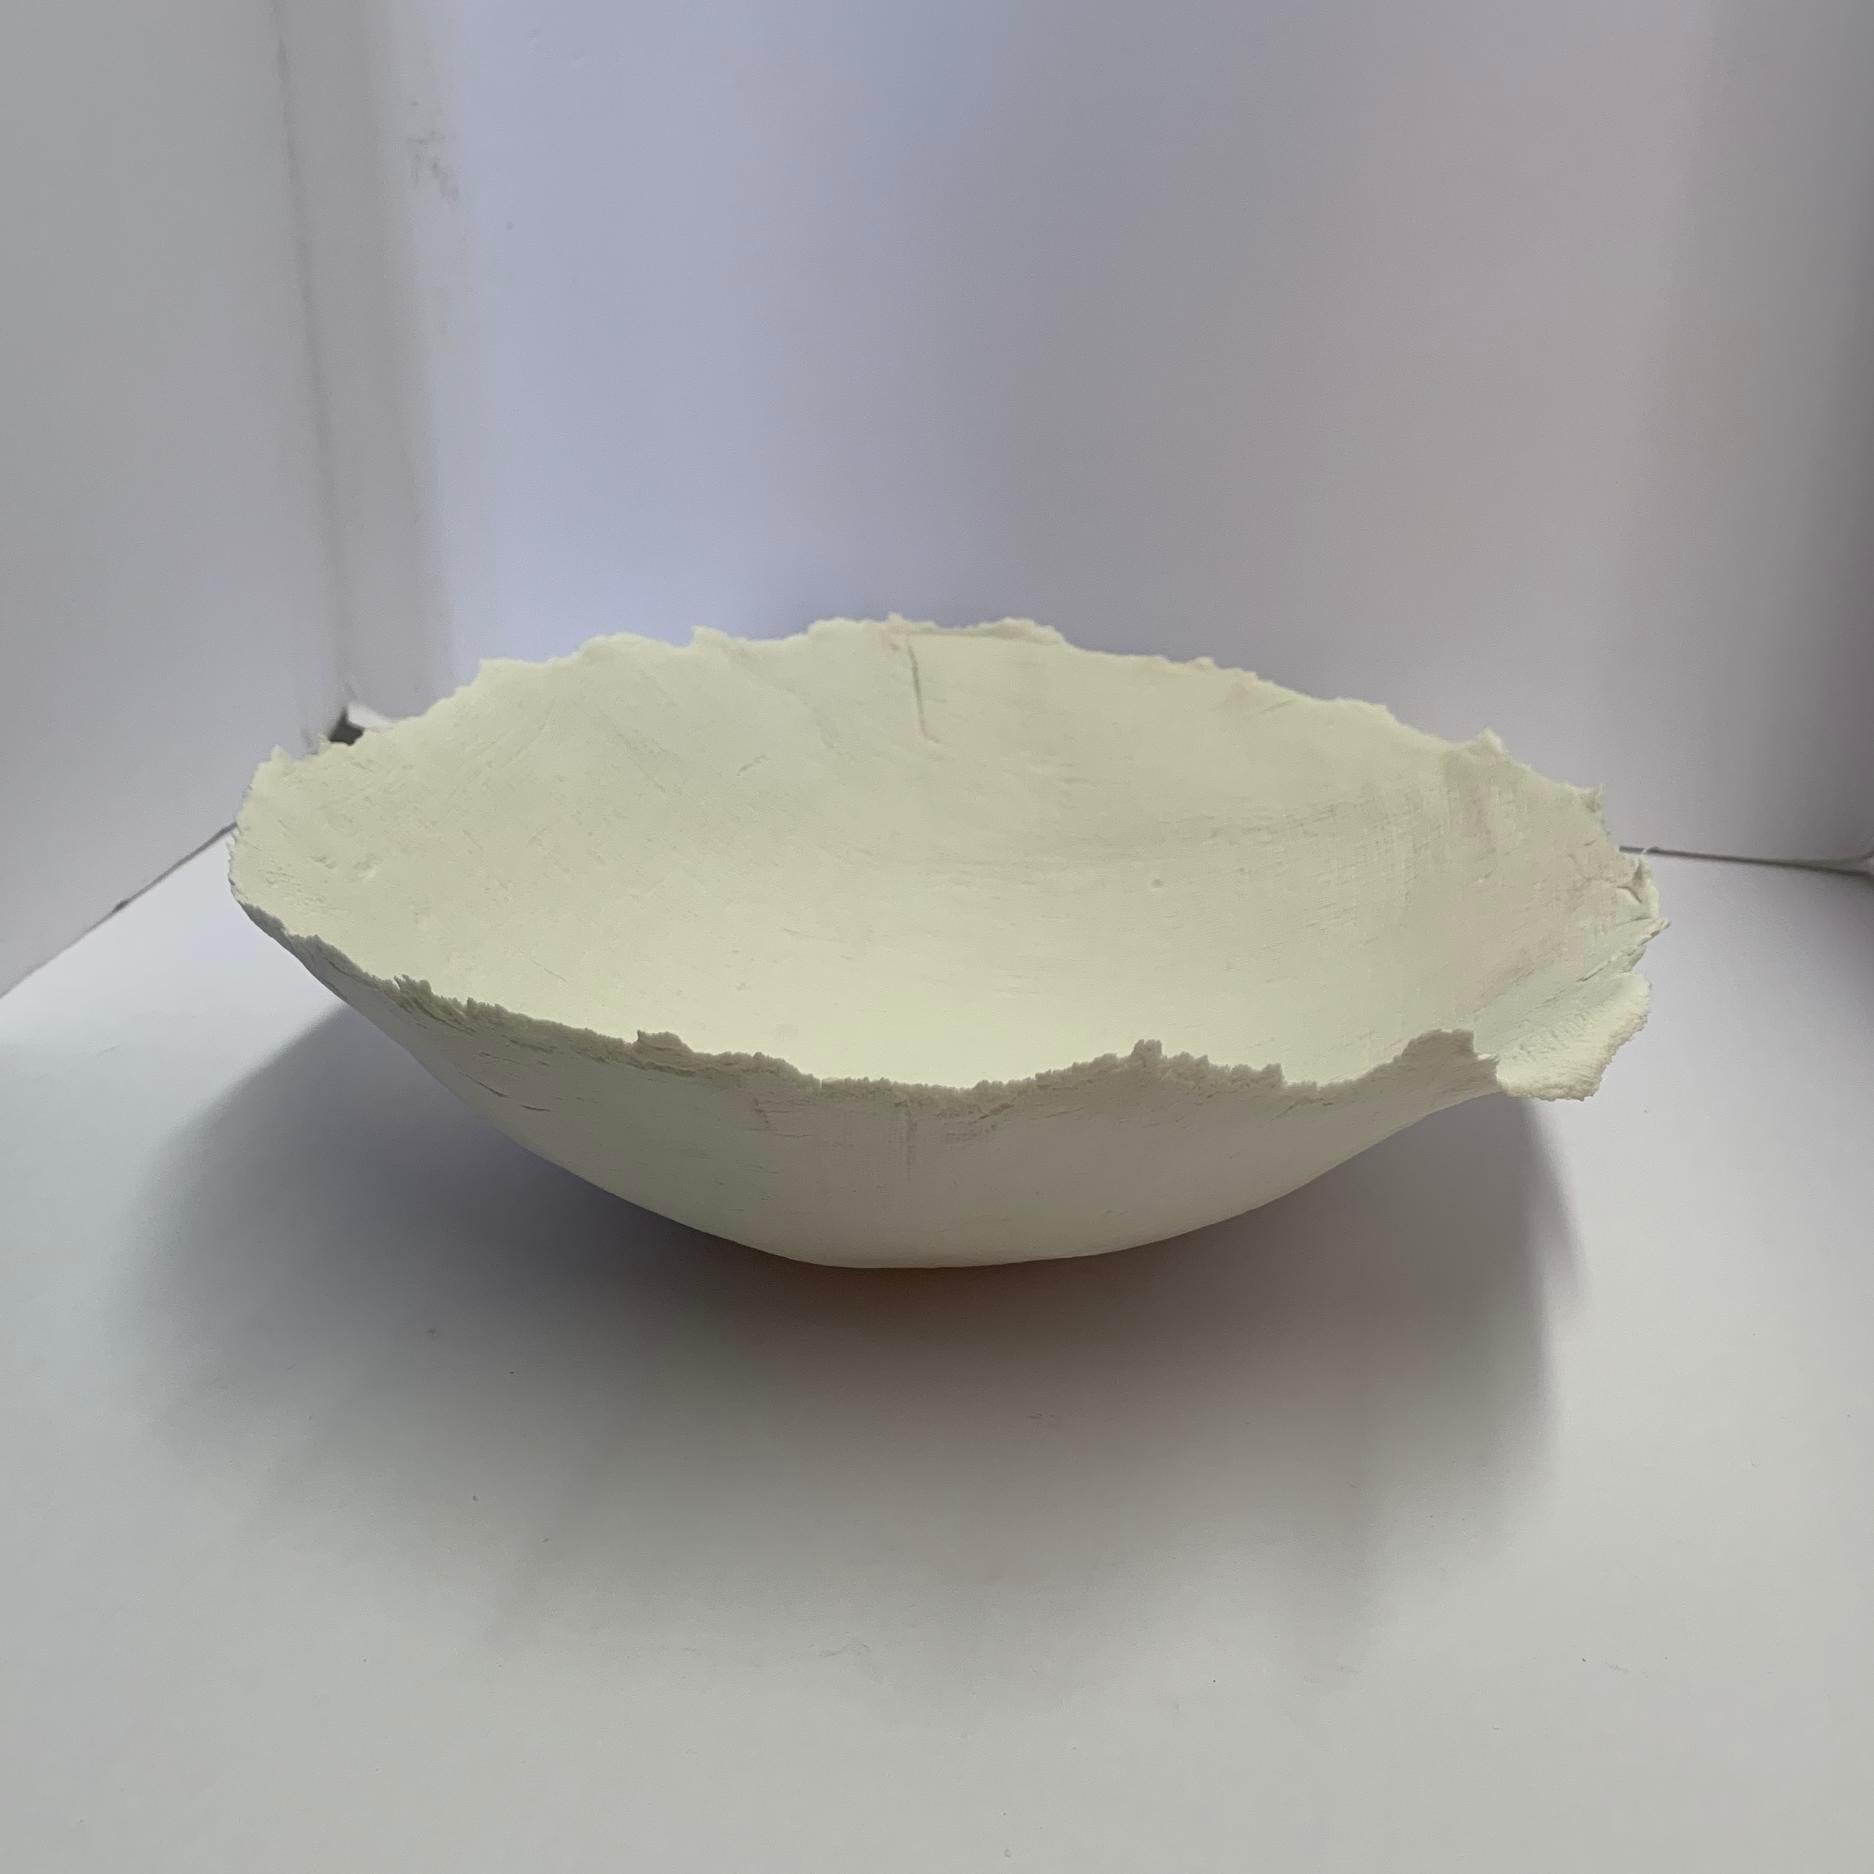 Contemporary French handmade white porcelain bowl with a linen textured look
Decorative rough edges.
Can hold food.